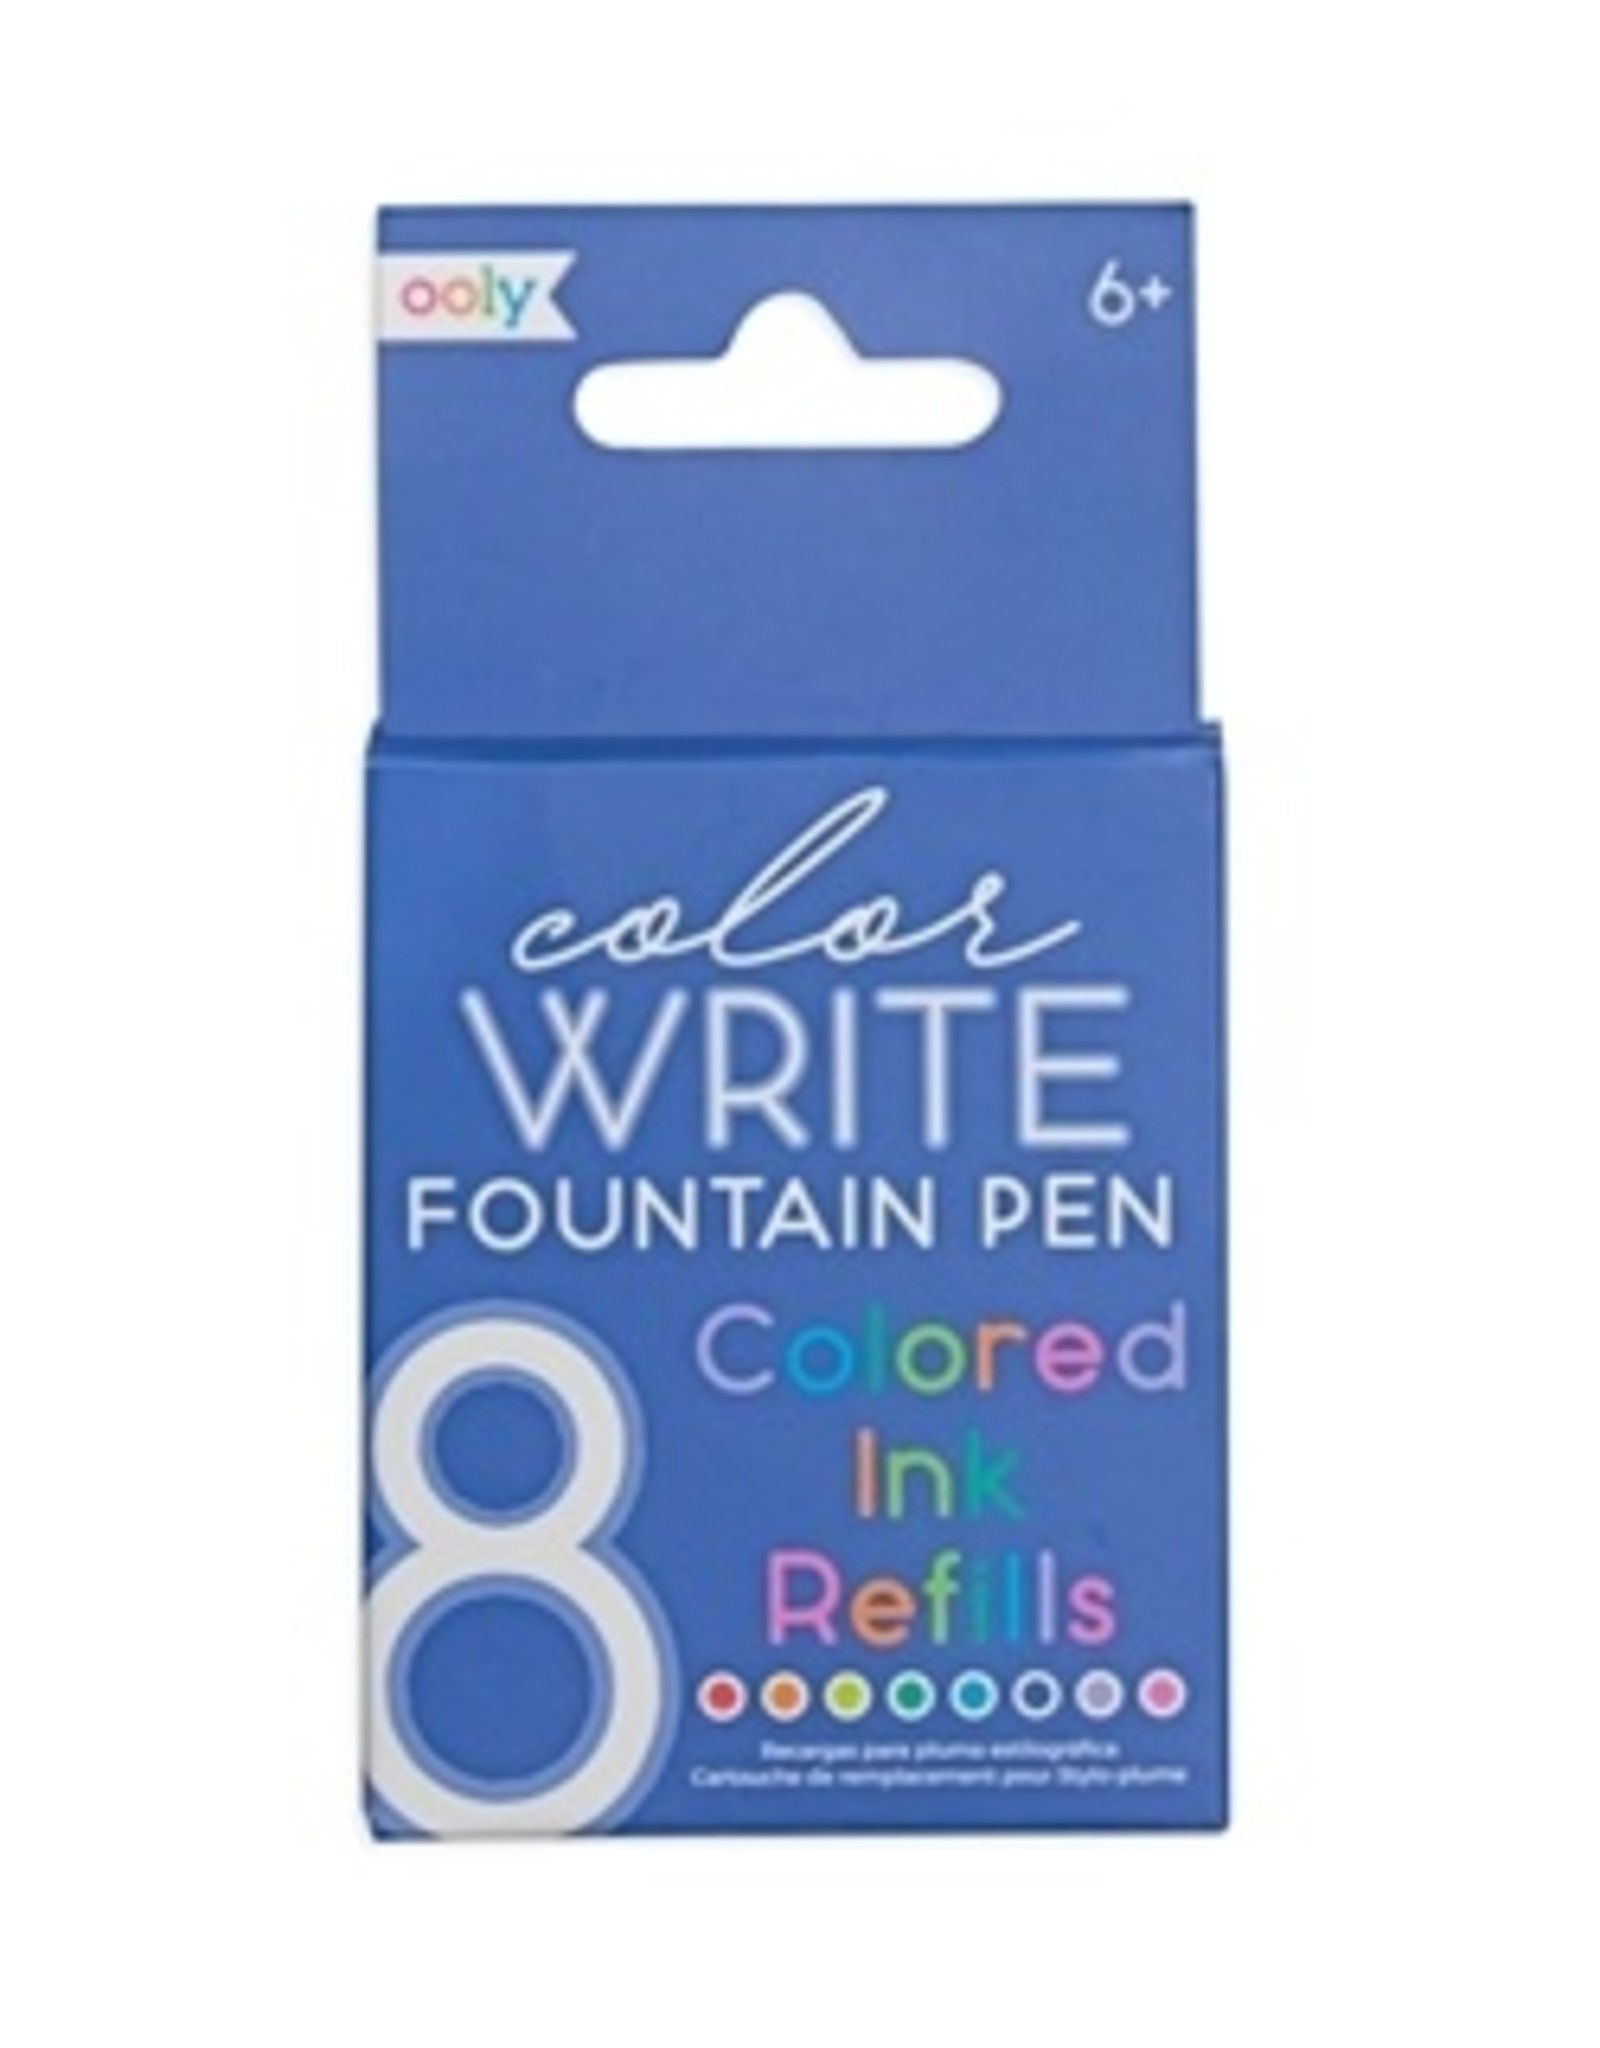 Ooly Color Write Fountain Pen Cartridge Refill